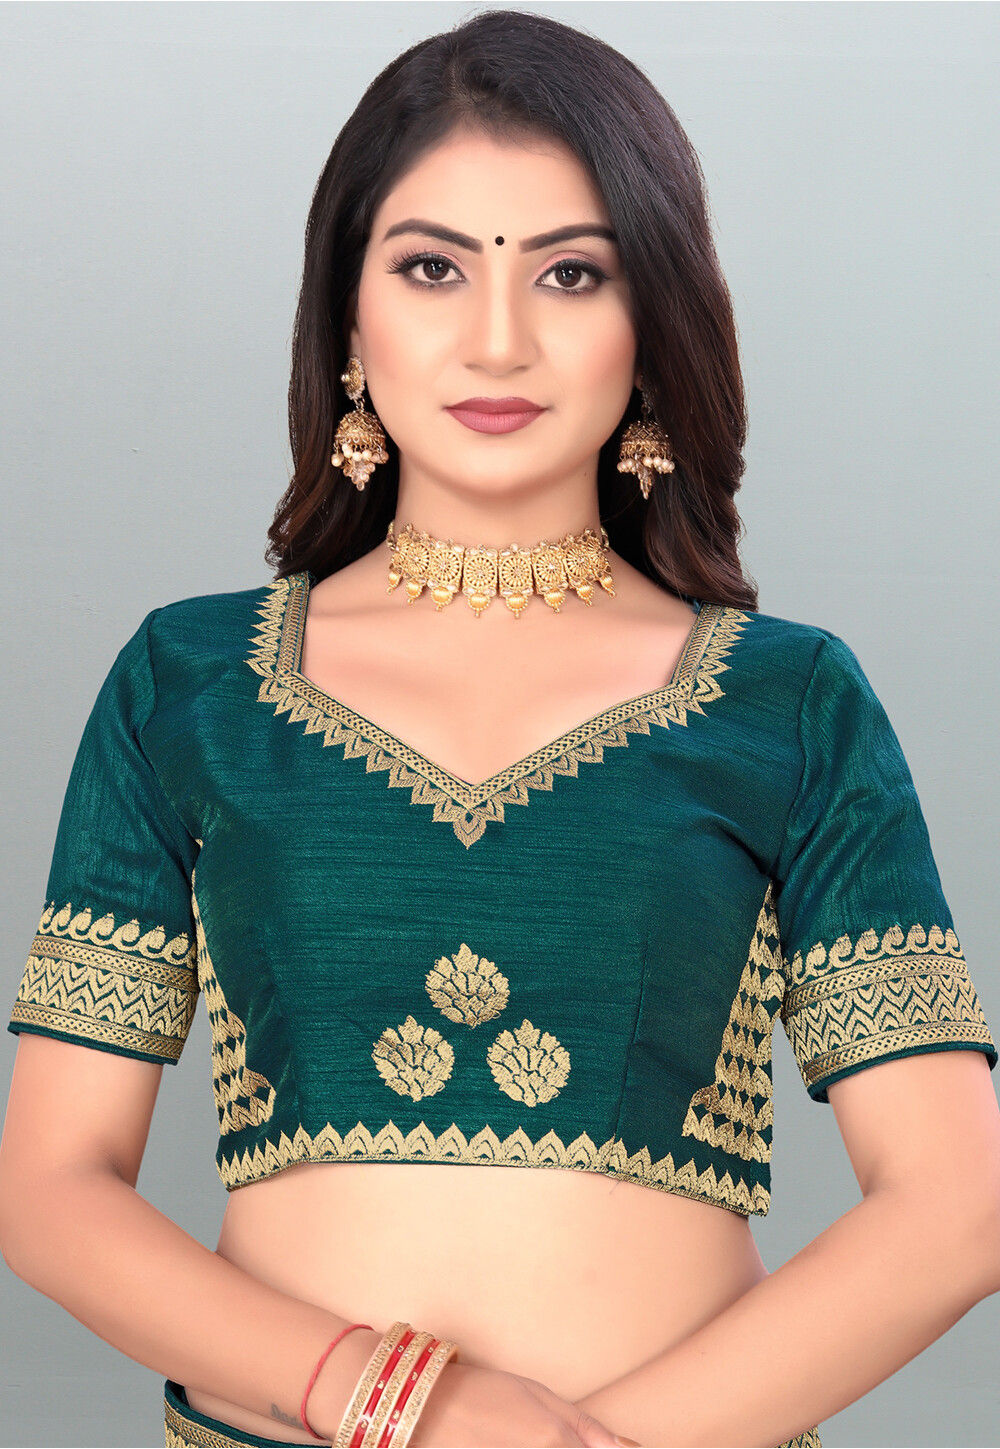 Embroidered Dupion Silk Blouse in Teal Green : UES89